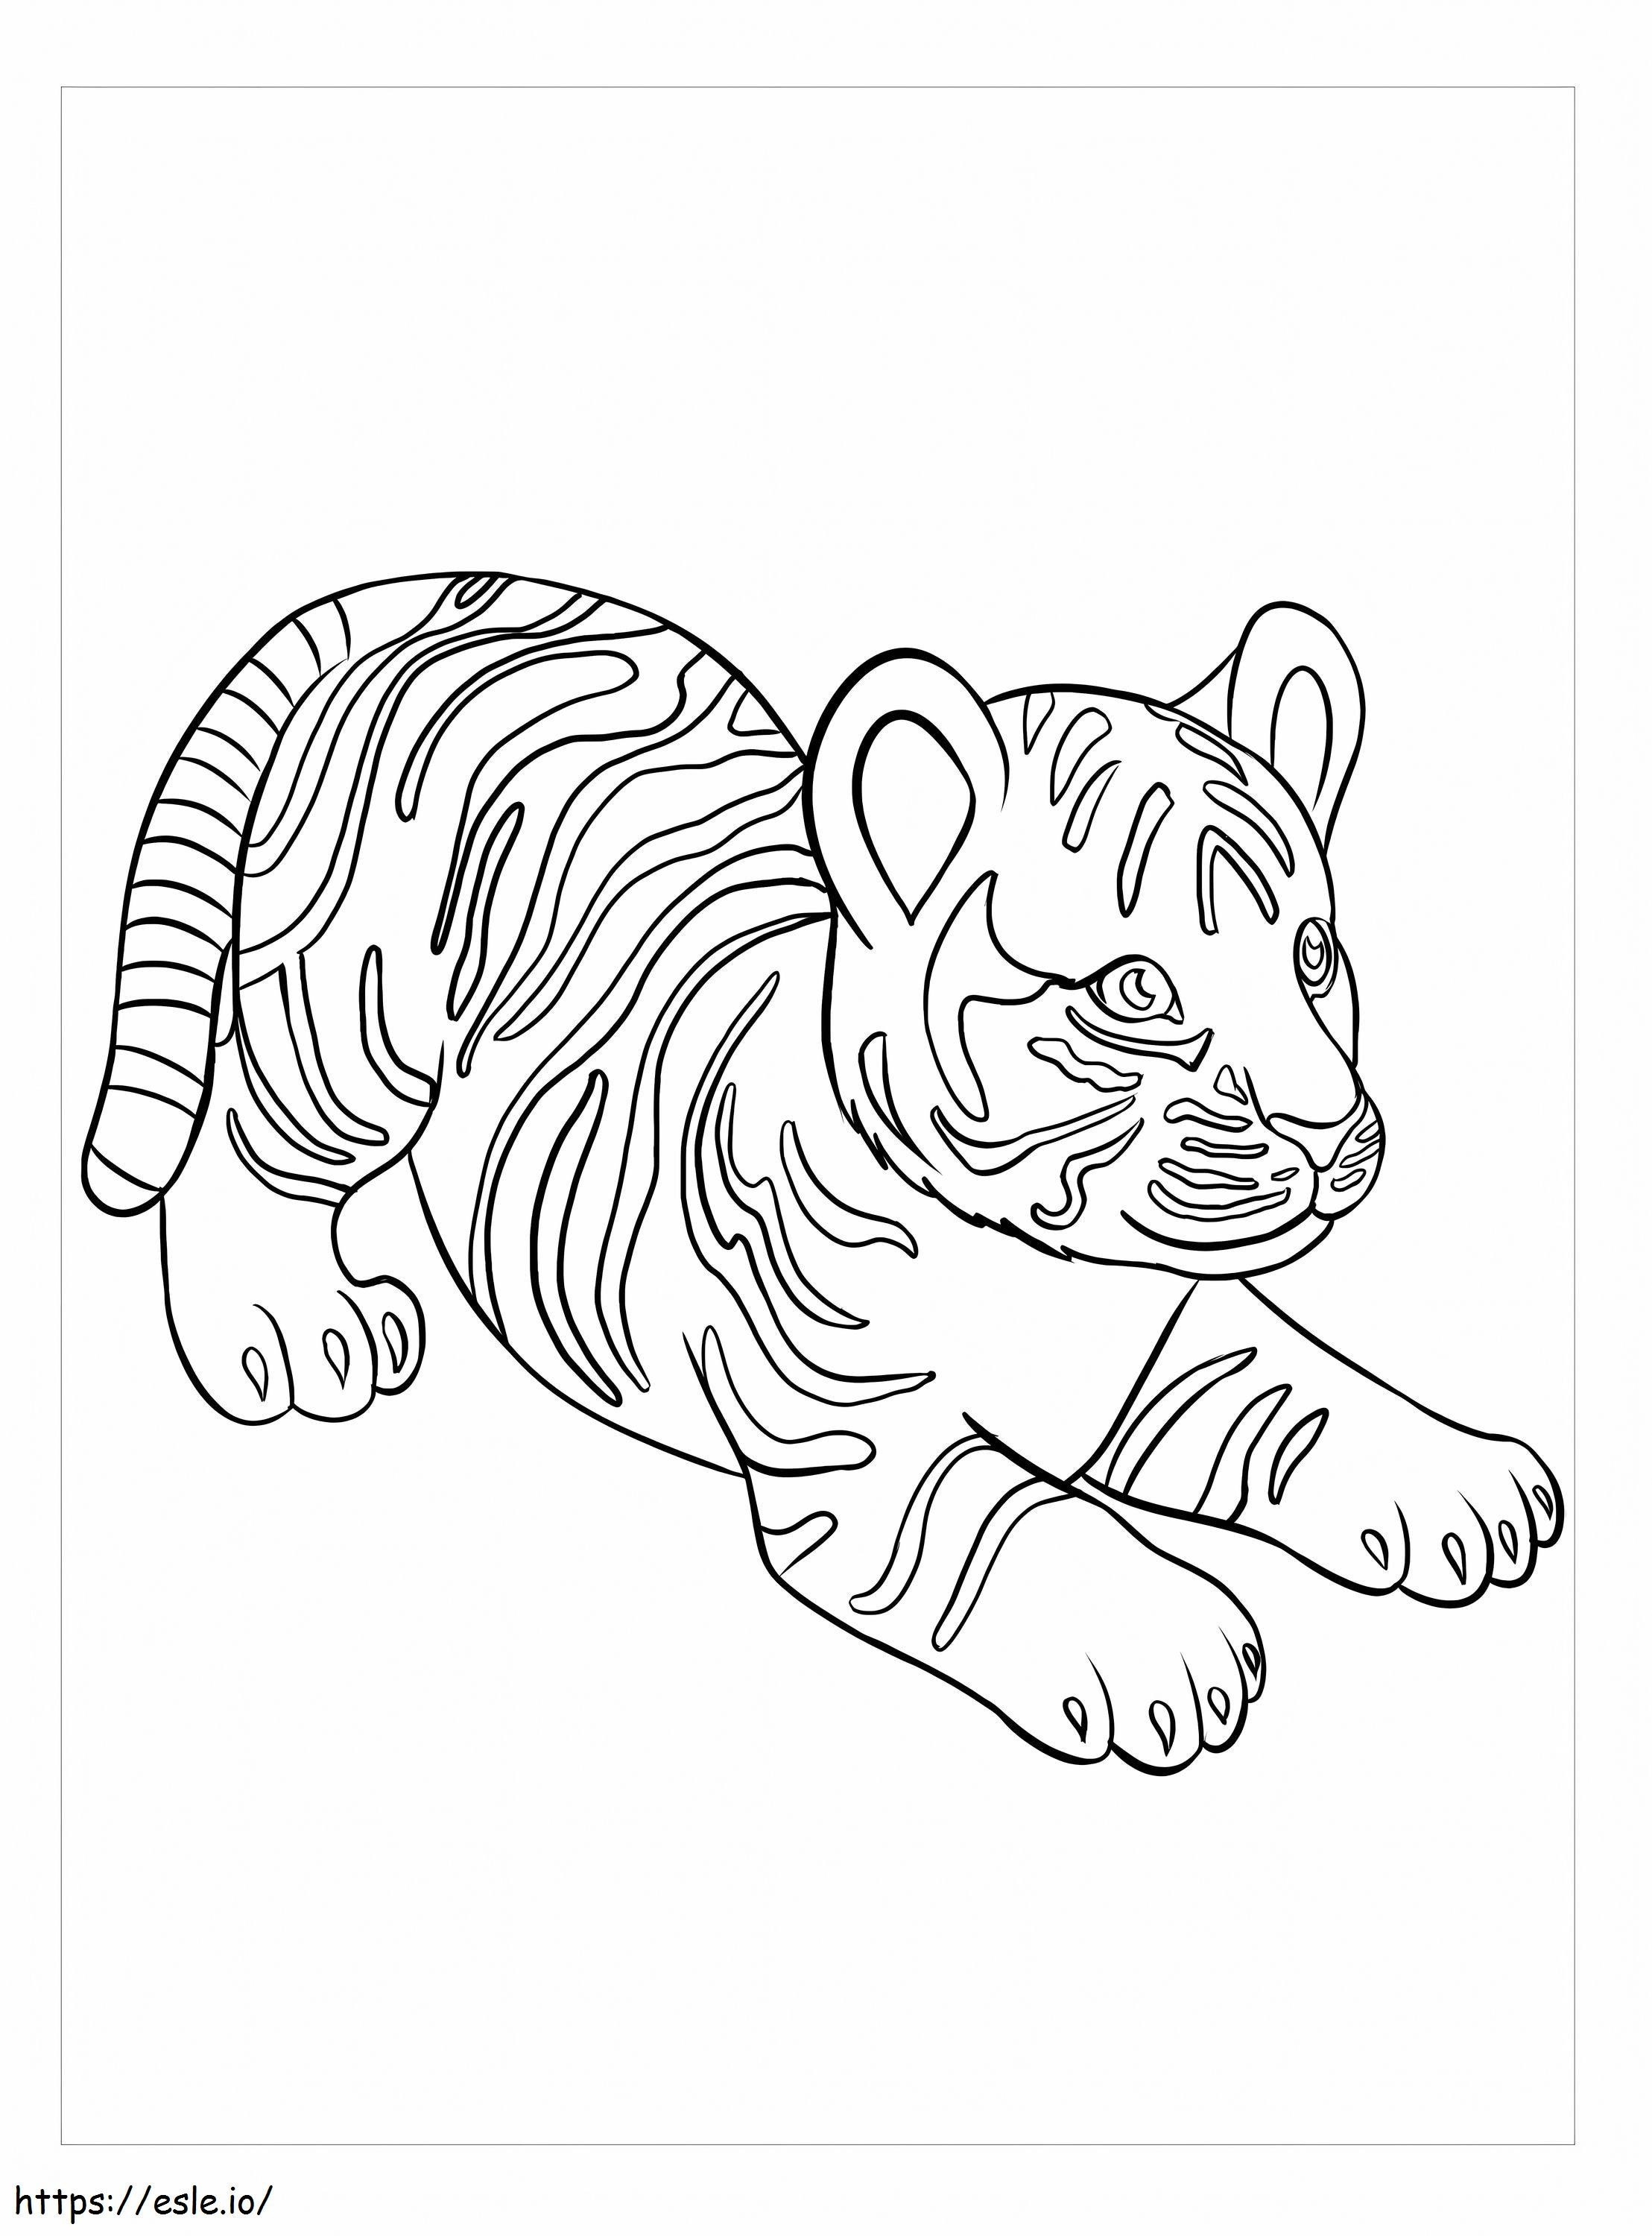 Perfect Tiger coloring page